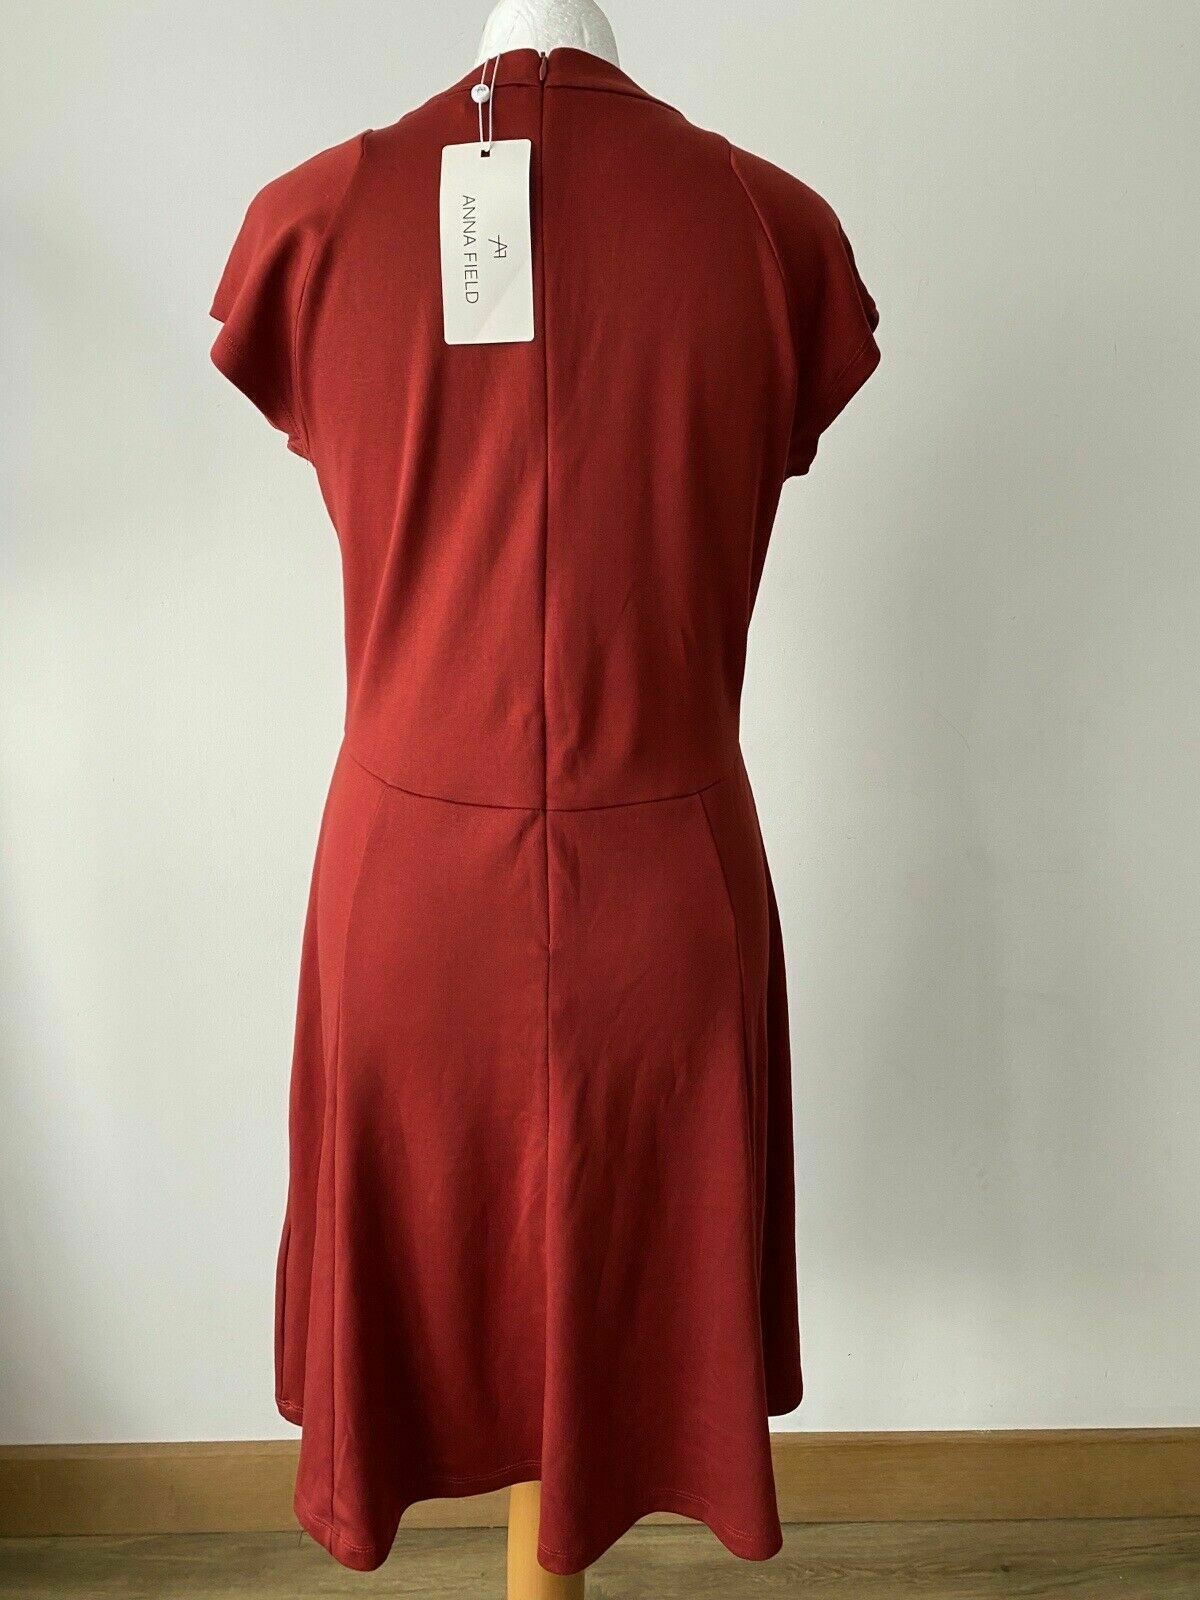 Anna Field Red Dahlia Fit & Flare Dress Size 12